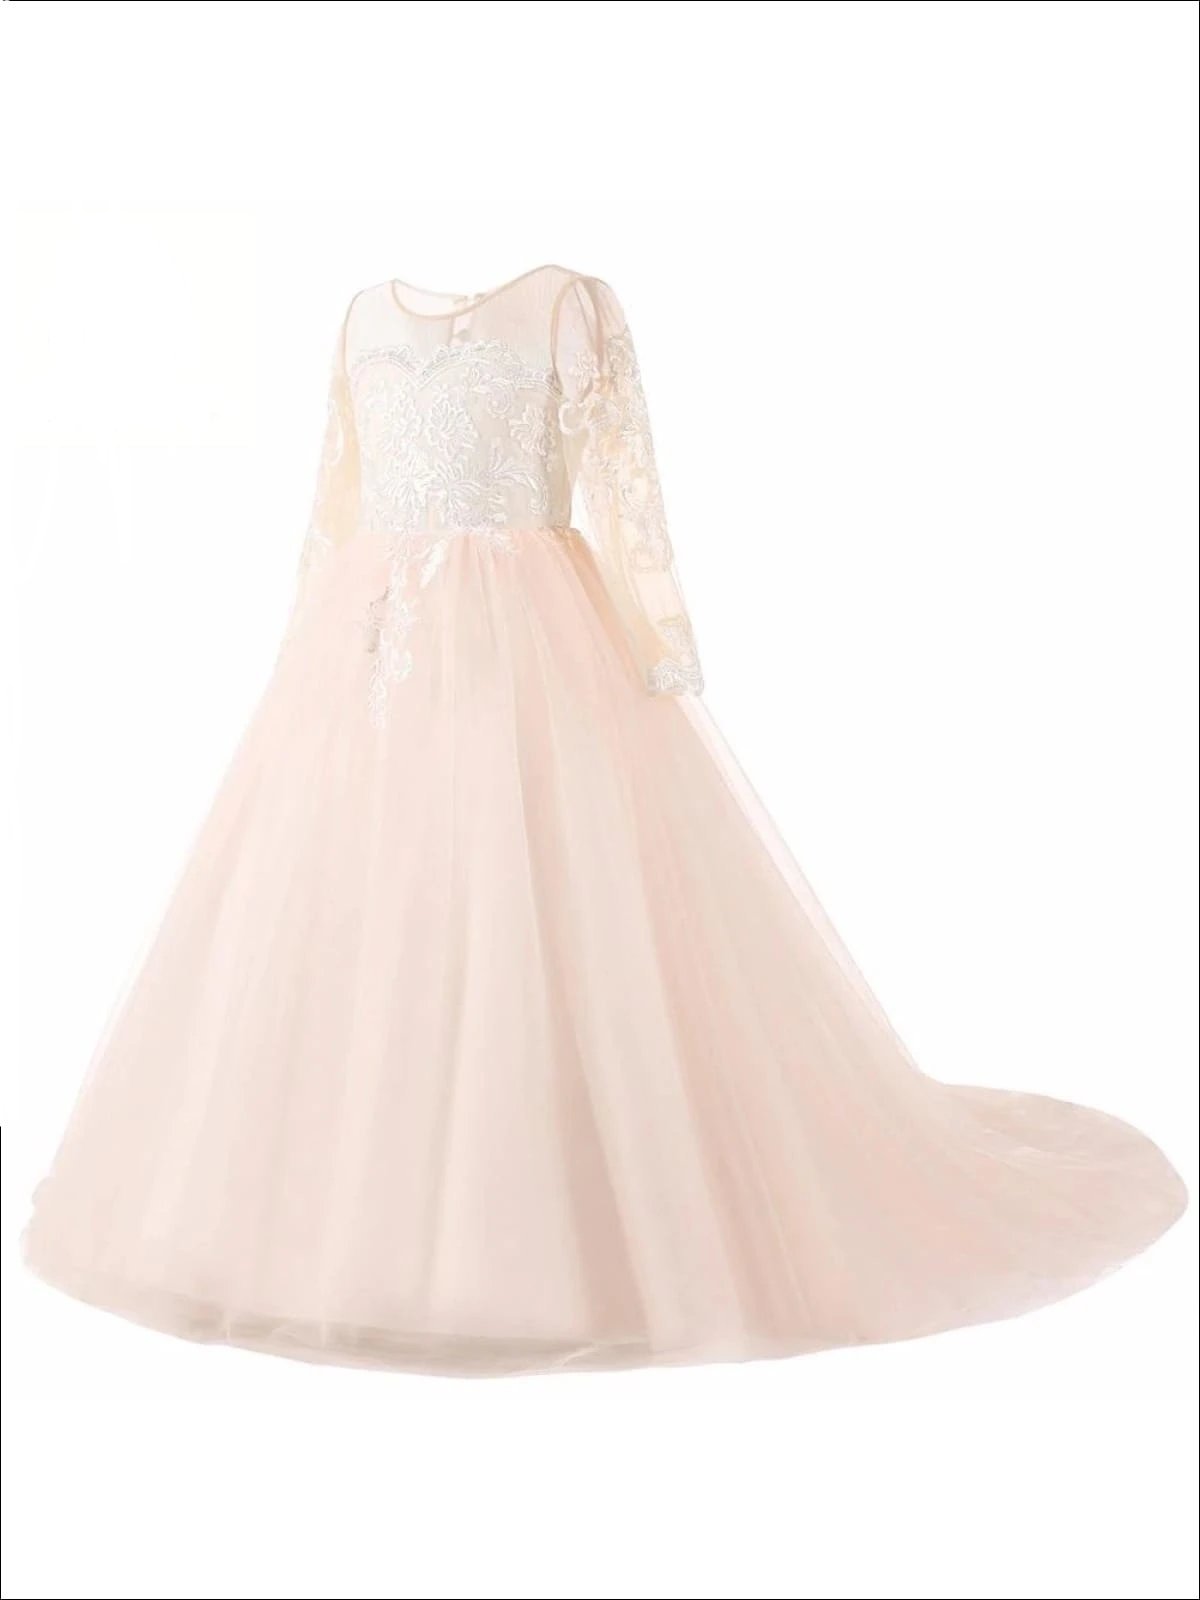 BENTLEY AND LACE- GOWNS FOR PHOTOGRAPHY Pink Dazzle Tulle Floor Length Gown